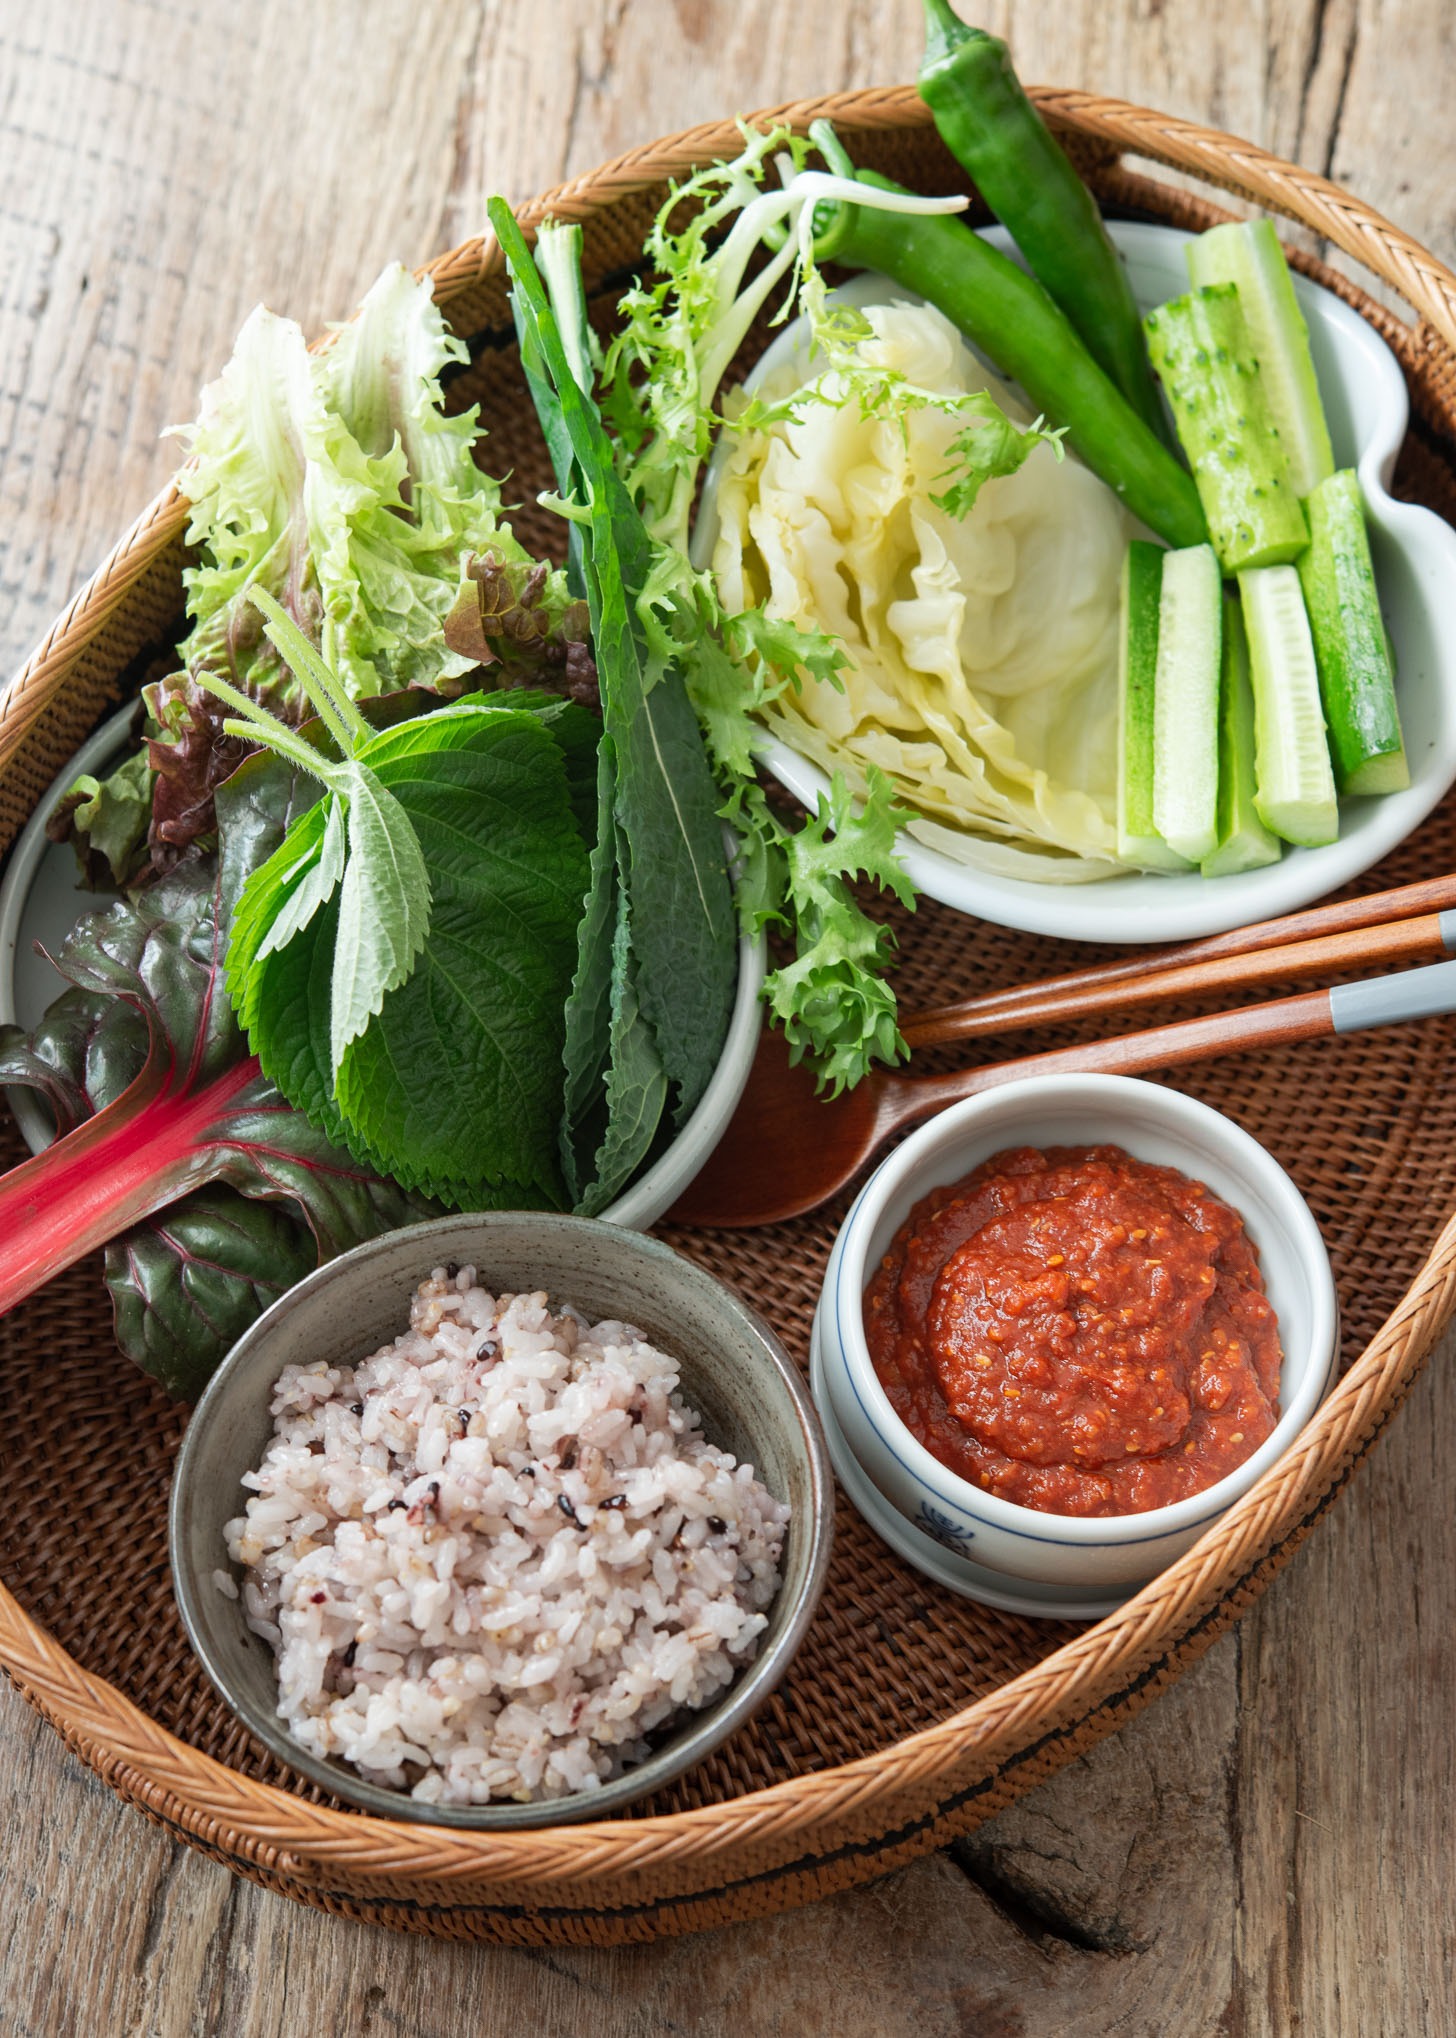 A basket ifilled with various lettuce, vegetables and ssamjang sauce with rice.